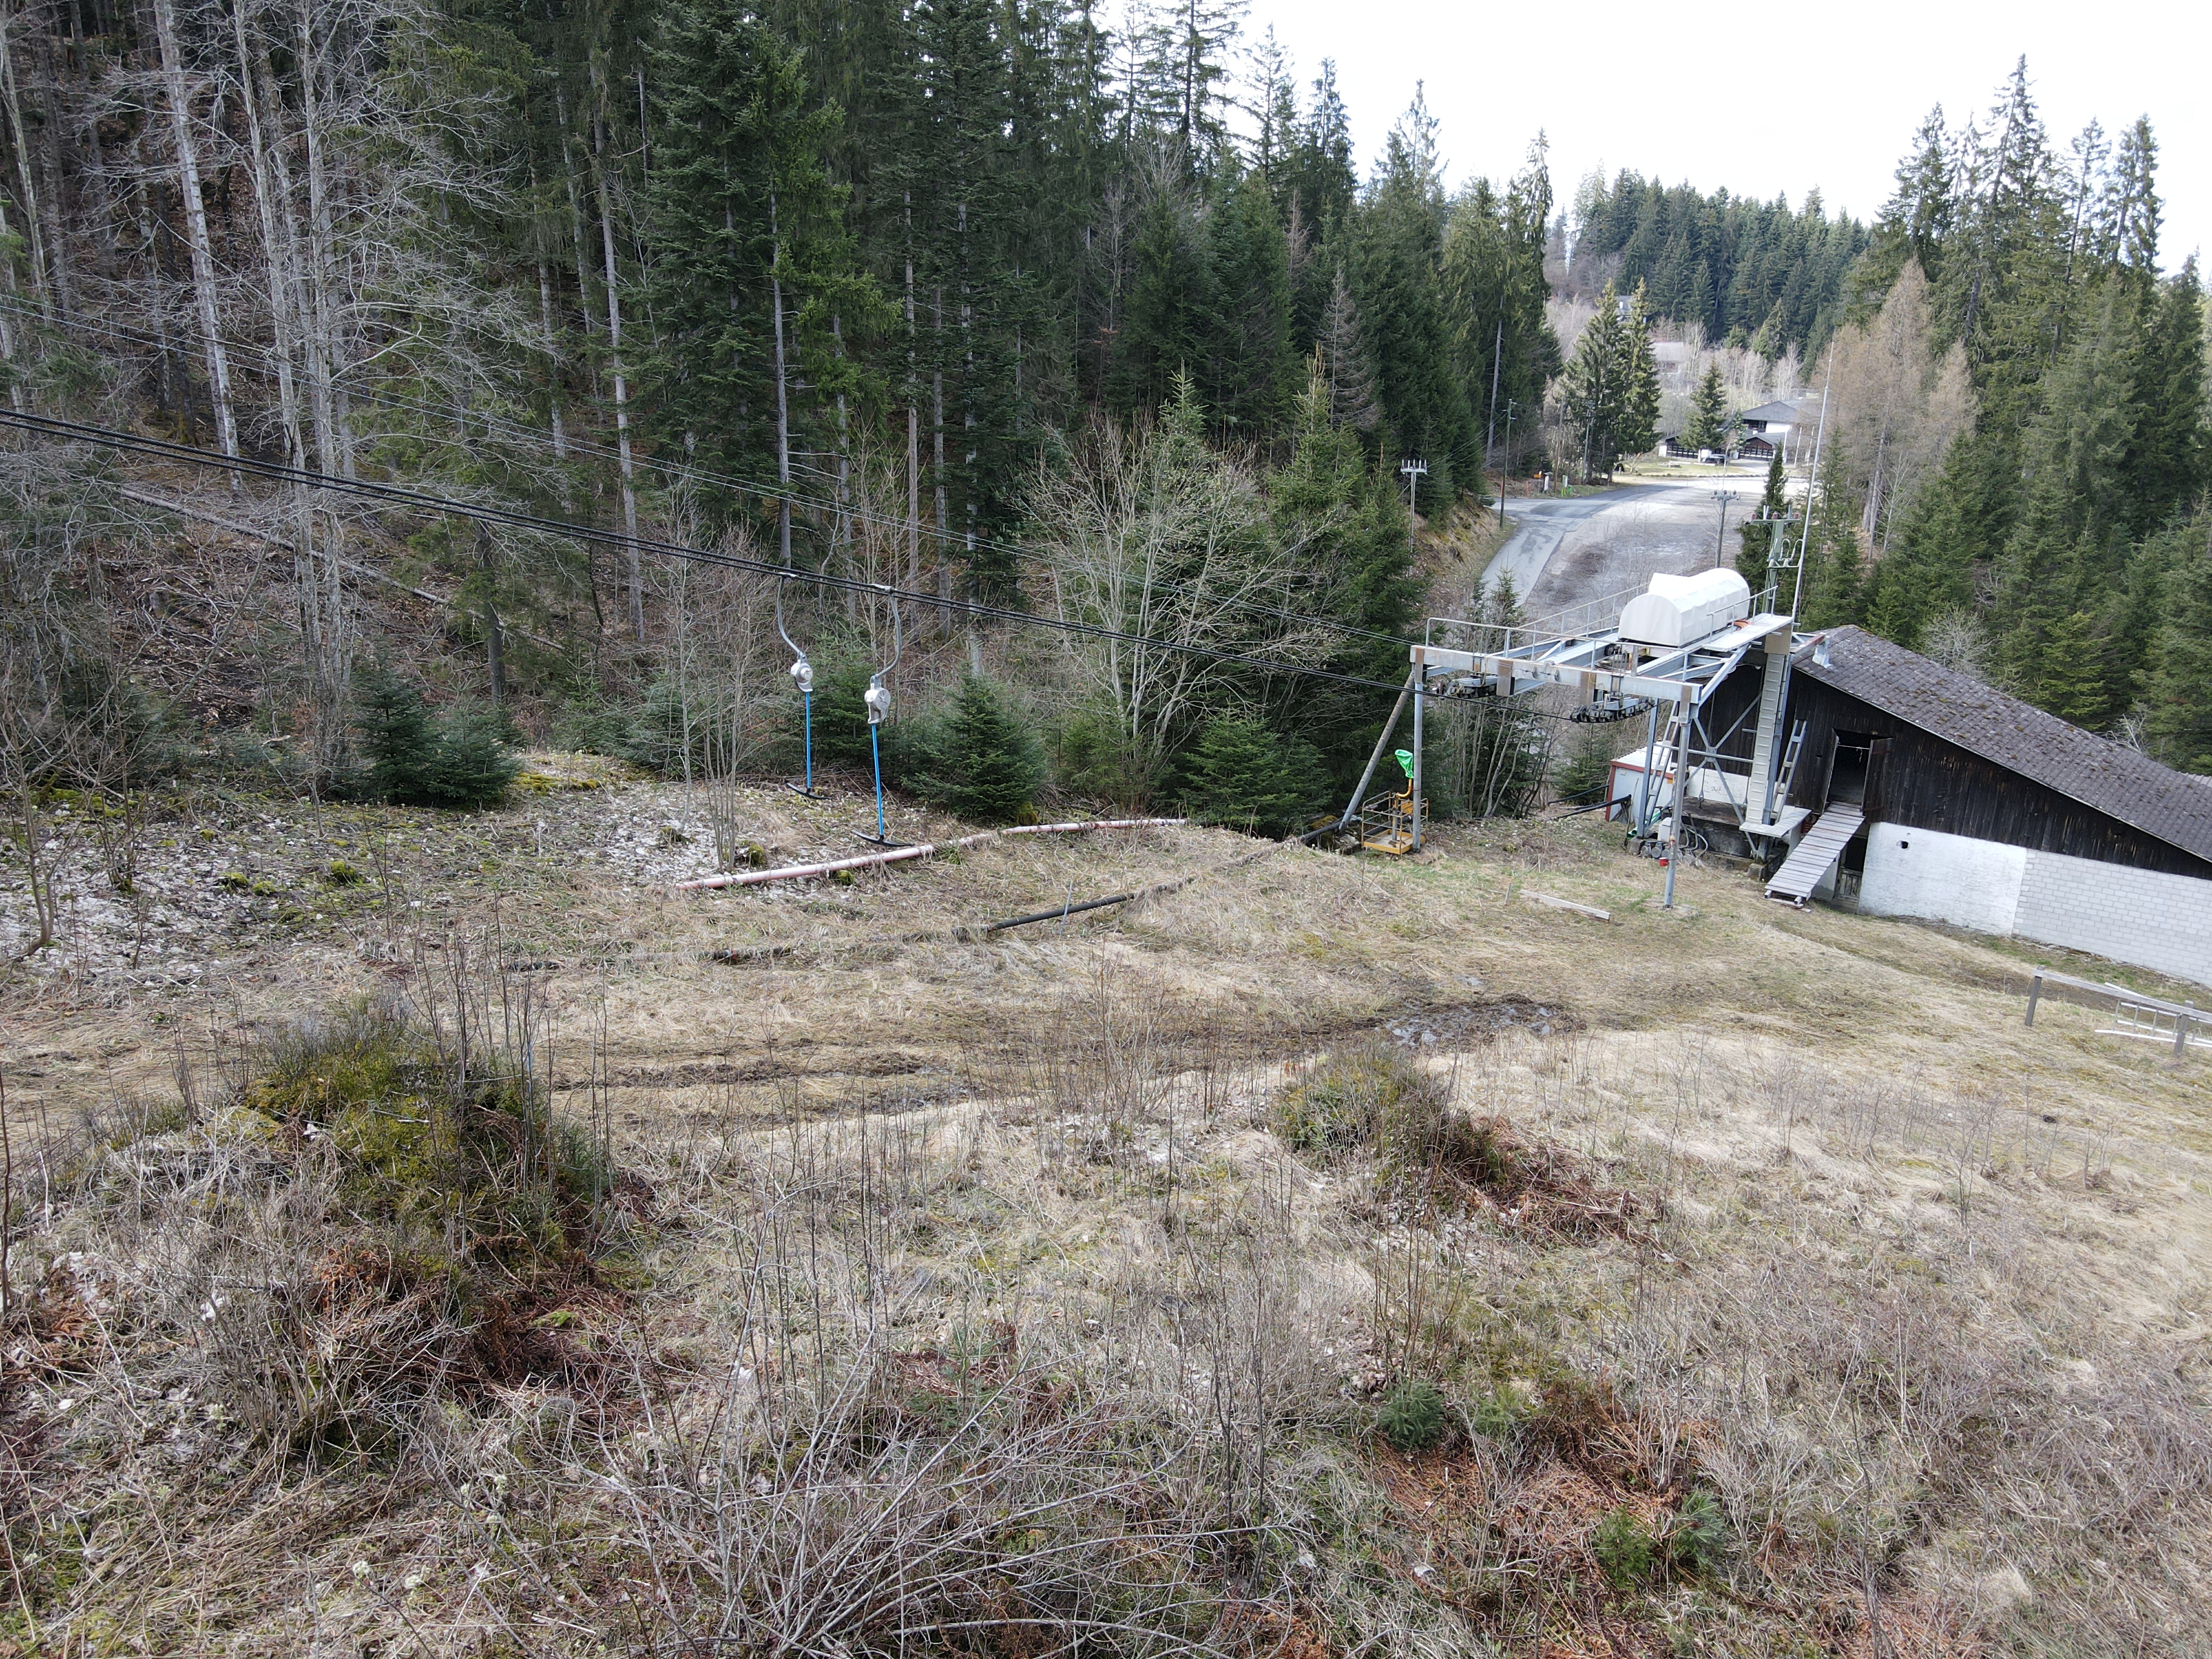 The ski lift at Rüschegg Eywald stands empty after the area was hit by unusually warm weather./CGTN/Julia Lyubova